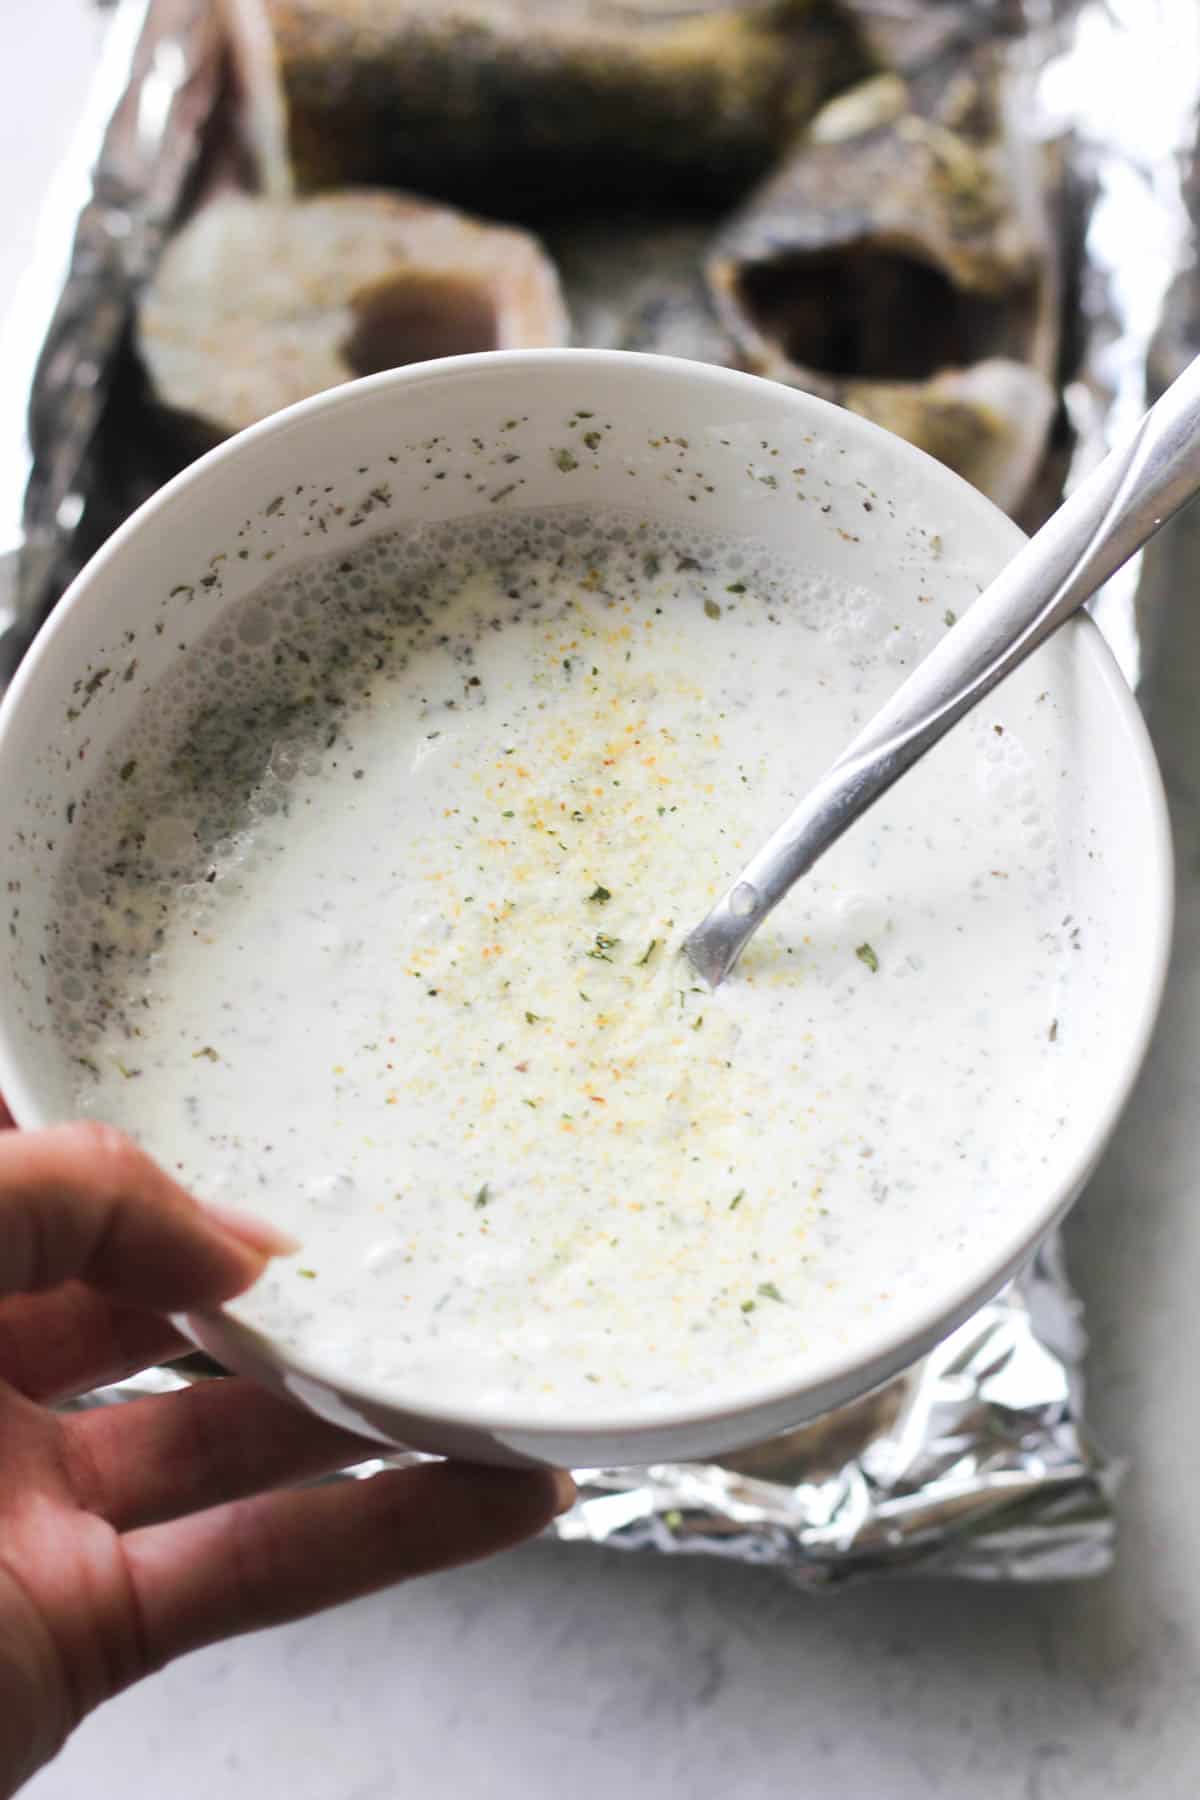 sour cream, water and oregano sauce in the bowl